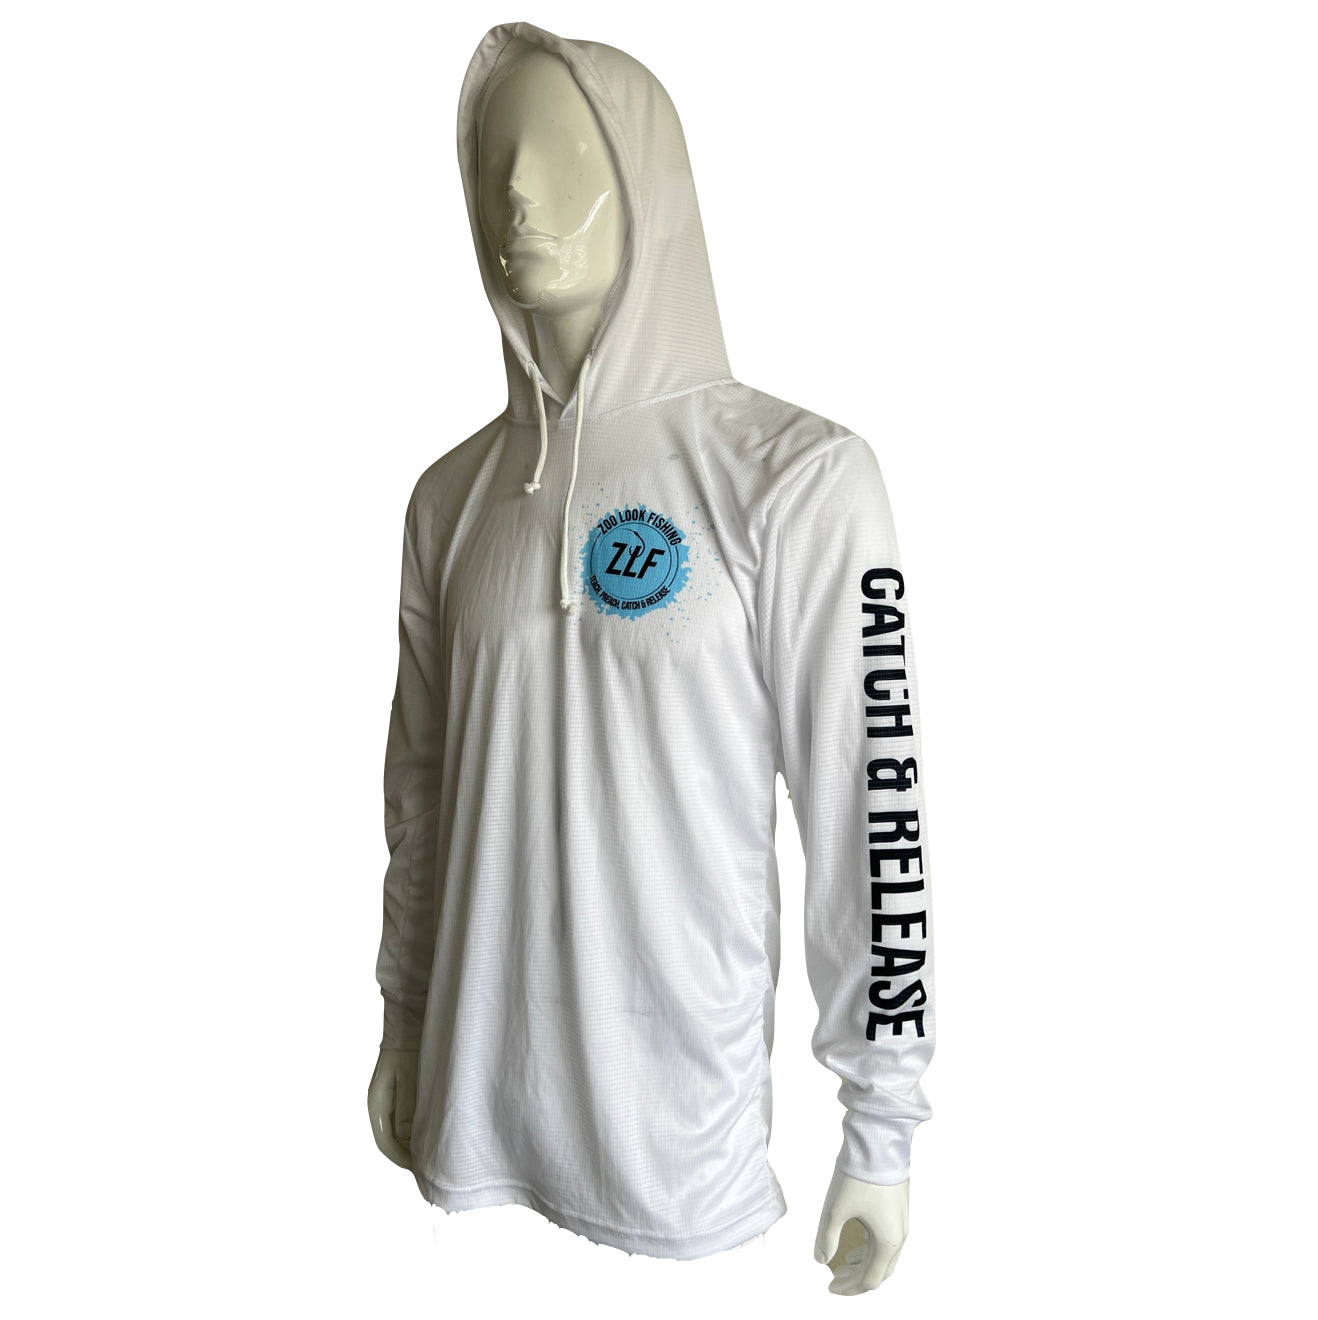 Long Sleeve Fishing Hoodie White and light blue